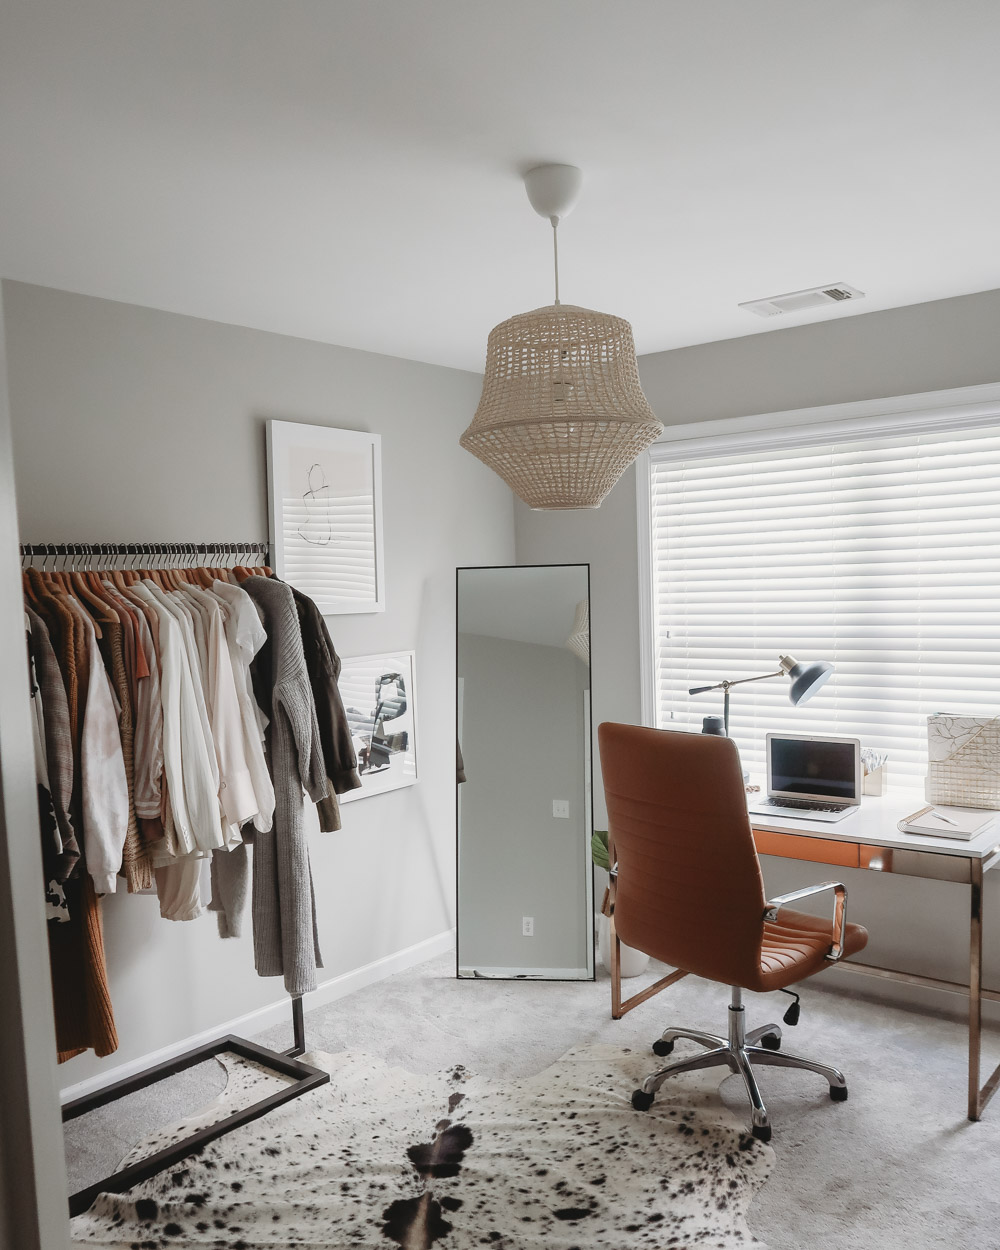 A room with an updated desk, clothing rack, and cowhide rug.